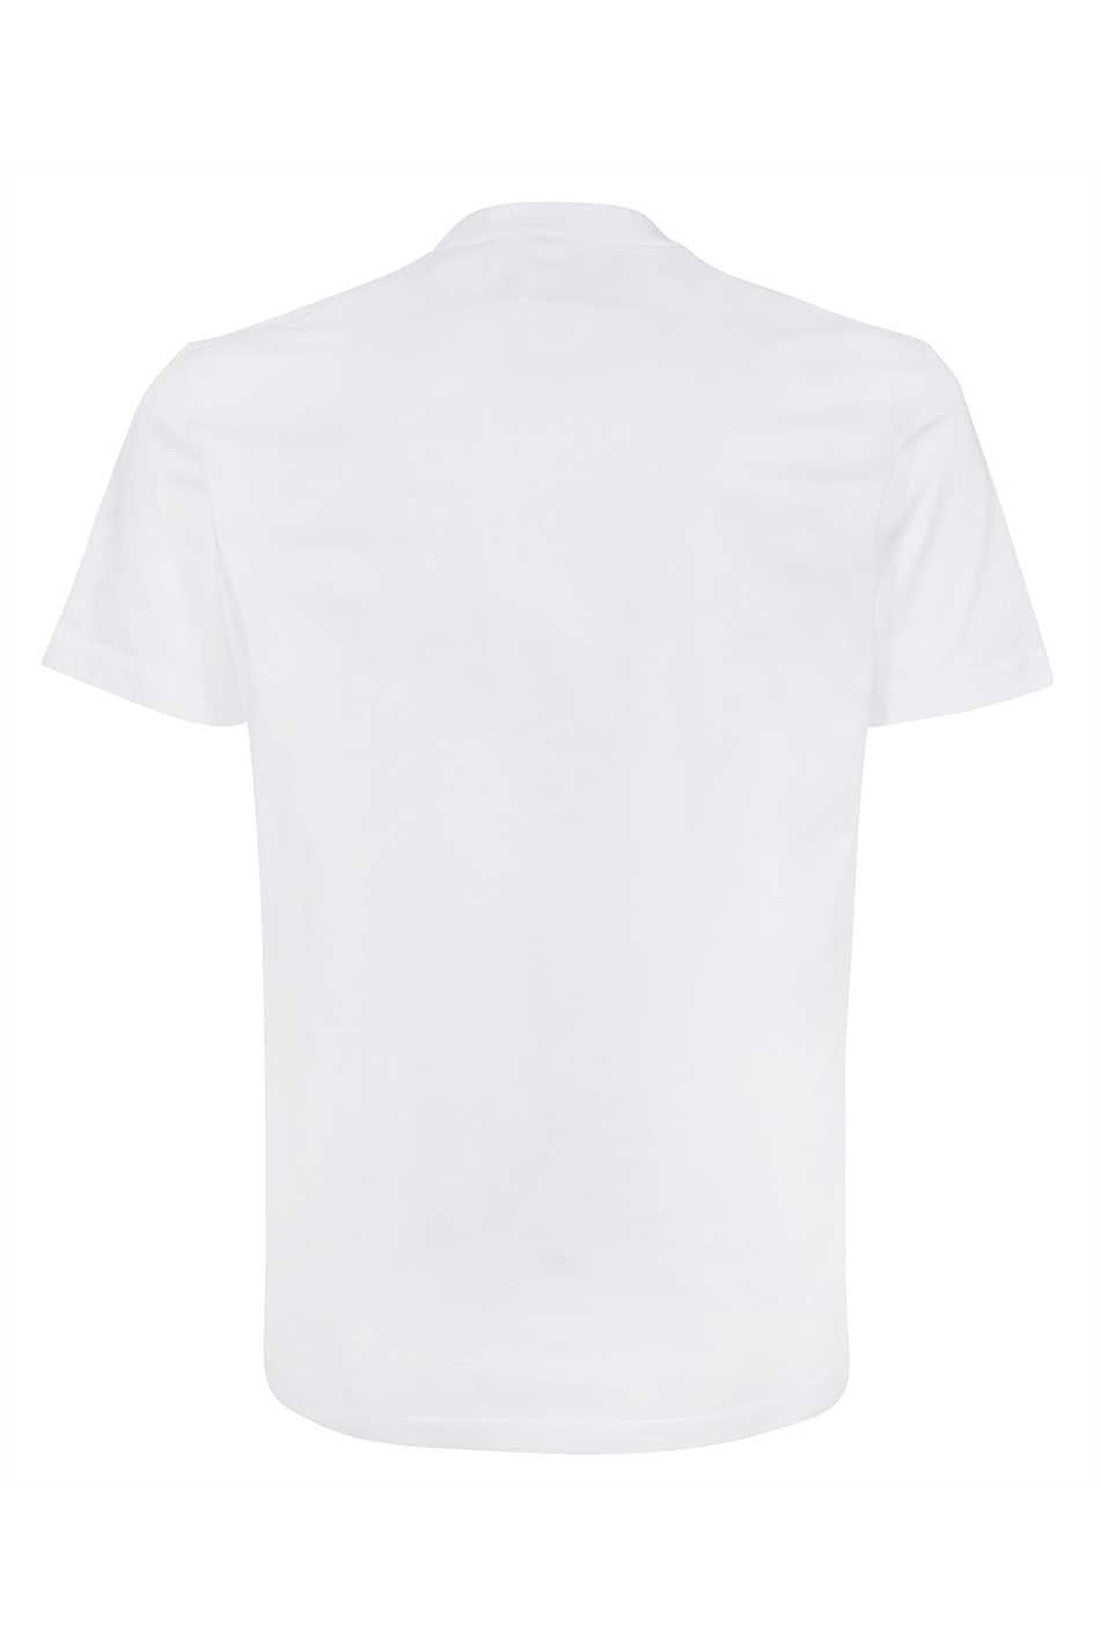 Dsquared2-OUTLET-SALE-Crew-neck-t-shirt-Shirts-ARCHIVE-COLLECTION-2_7e1bb4fb-a7e6-4612-96f9-0b2fa5cf61ac.jpg